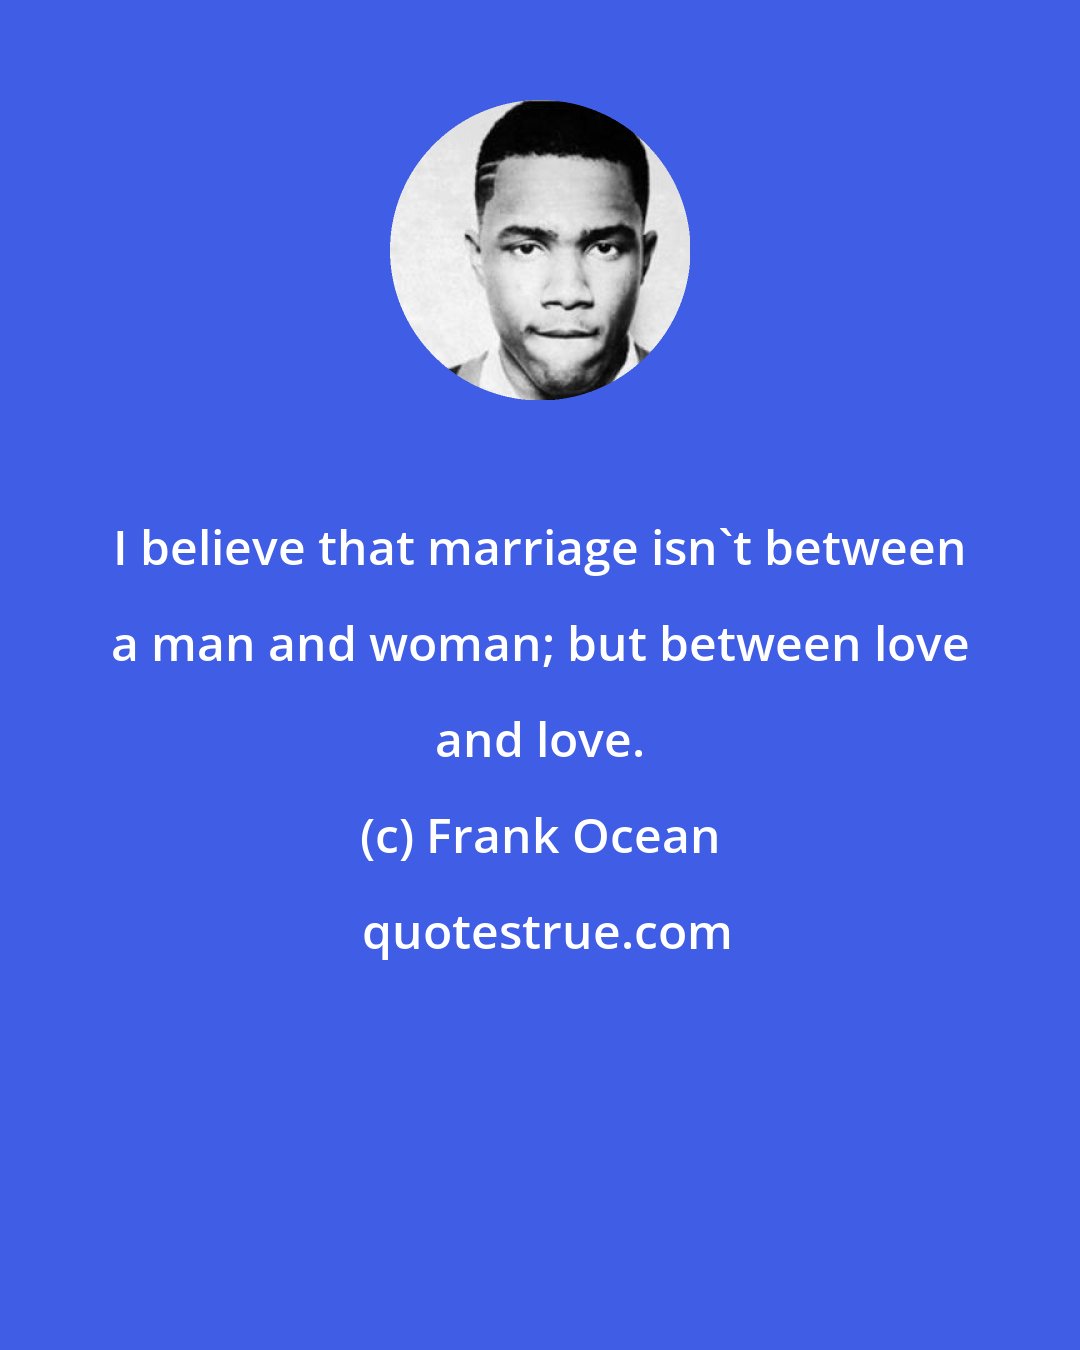 Frank Ocean: I believe that marriage isn't between a man and woman; but between love and love.